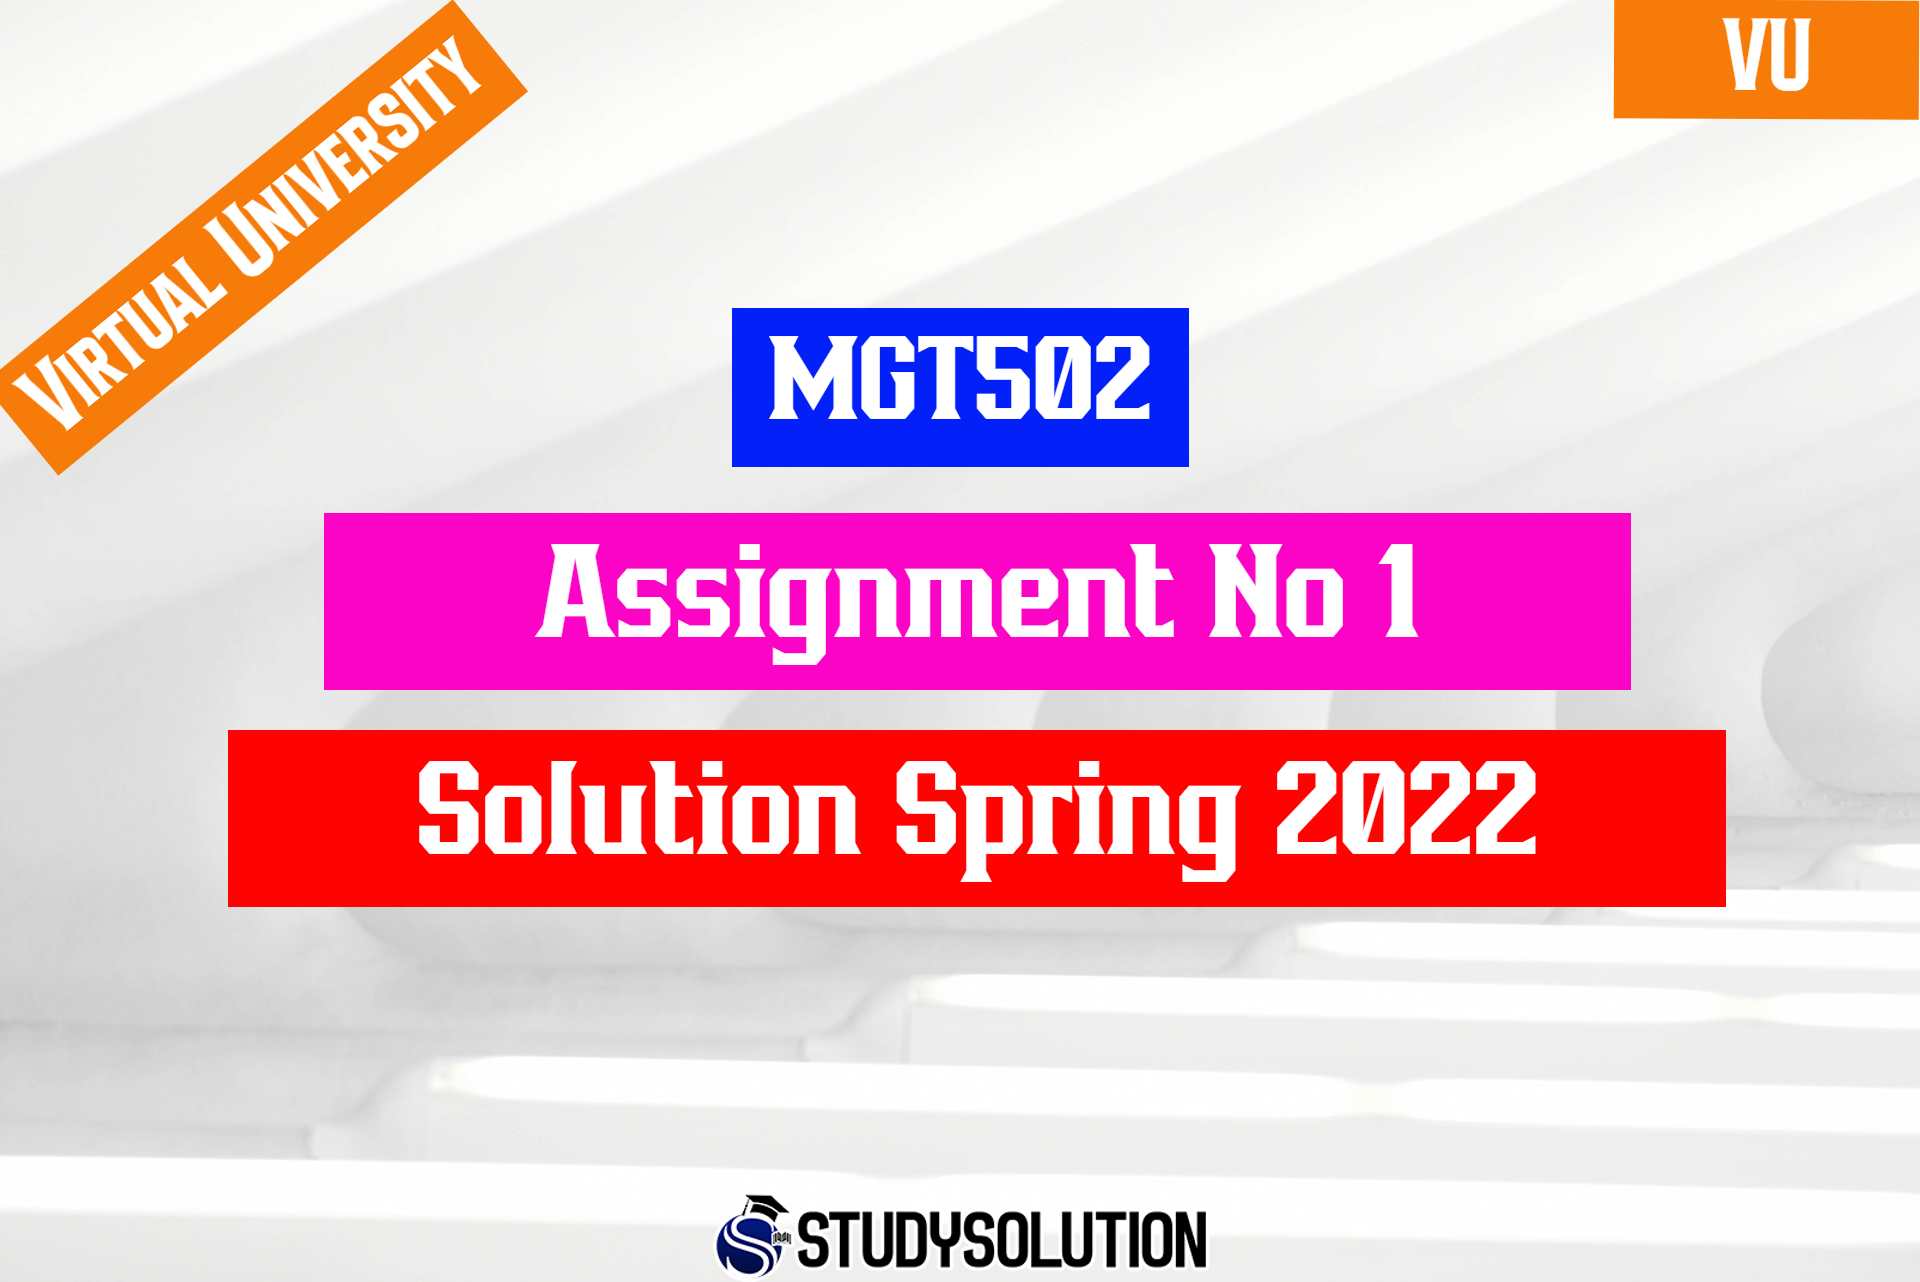 mgt502 assignment no 1 solution 2022